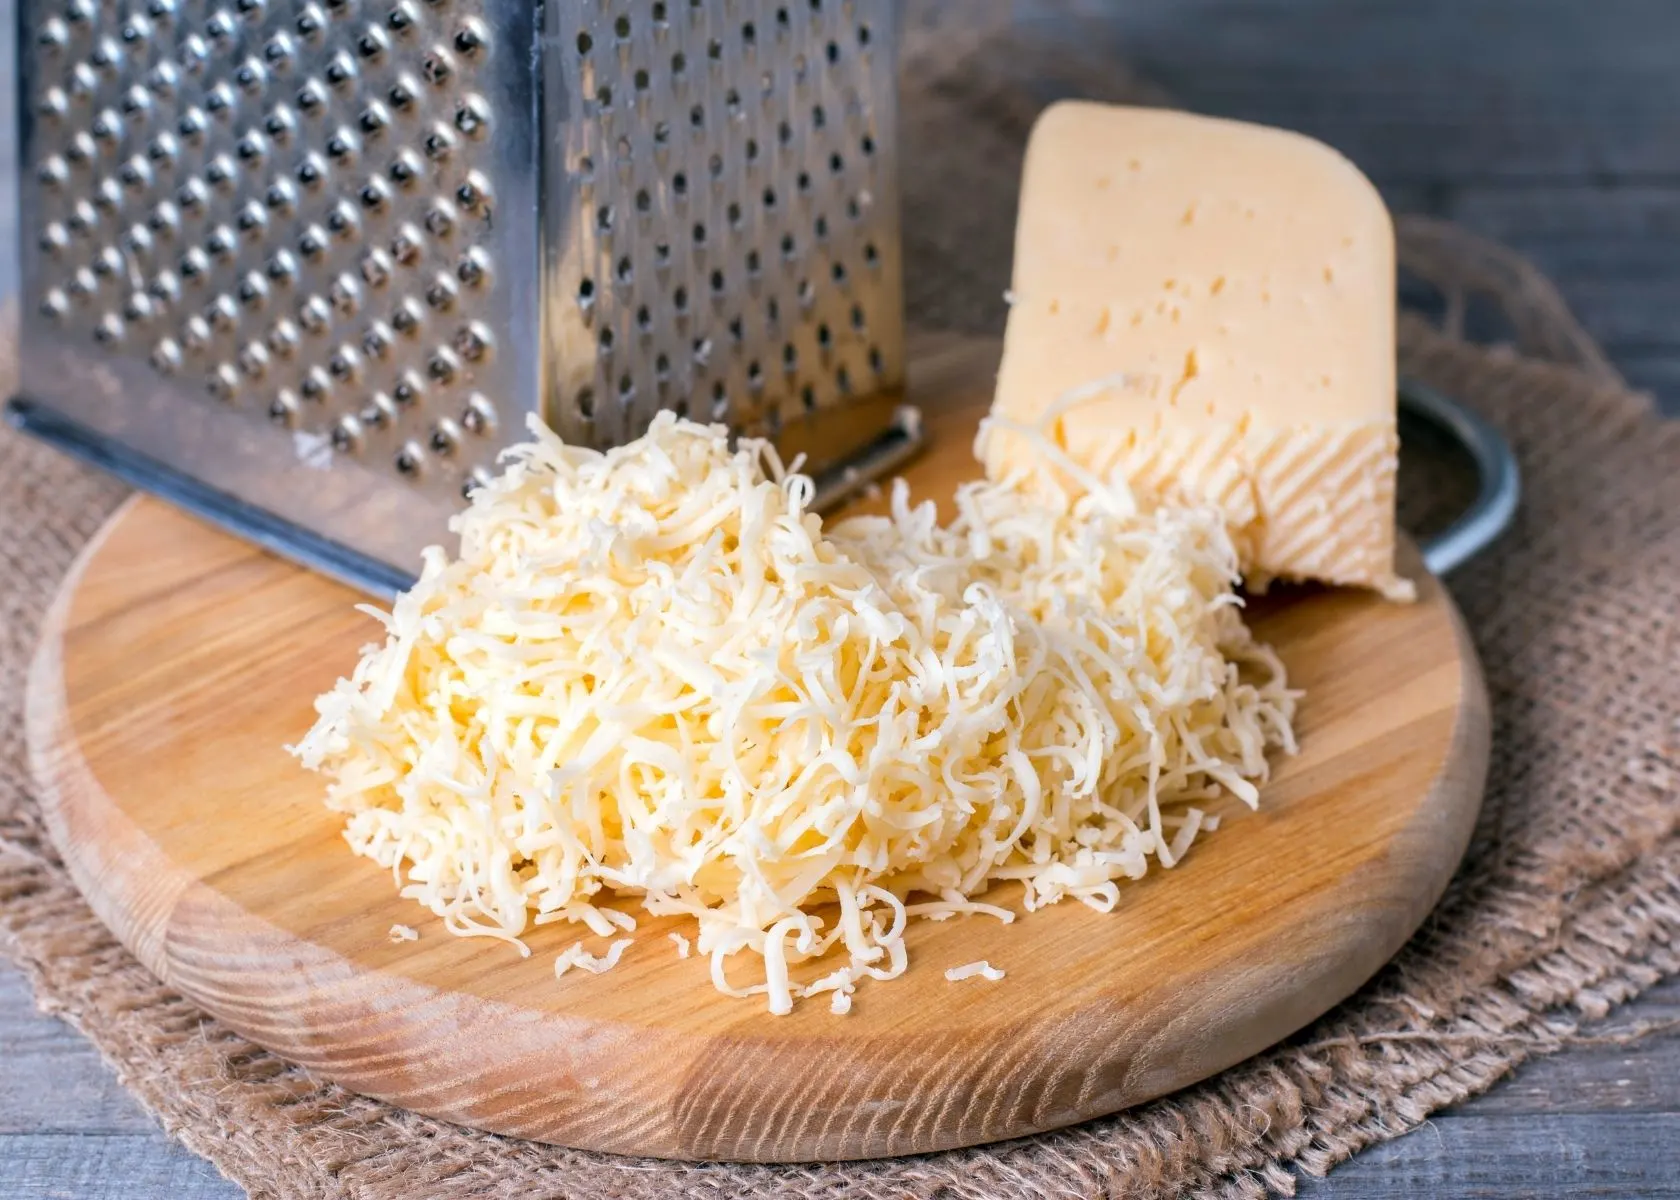 Grated cheese on circular wooden cutting board next to block and metal grater.